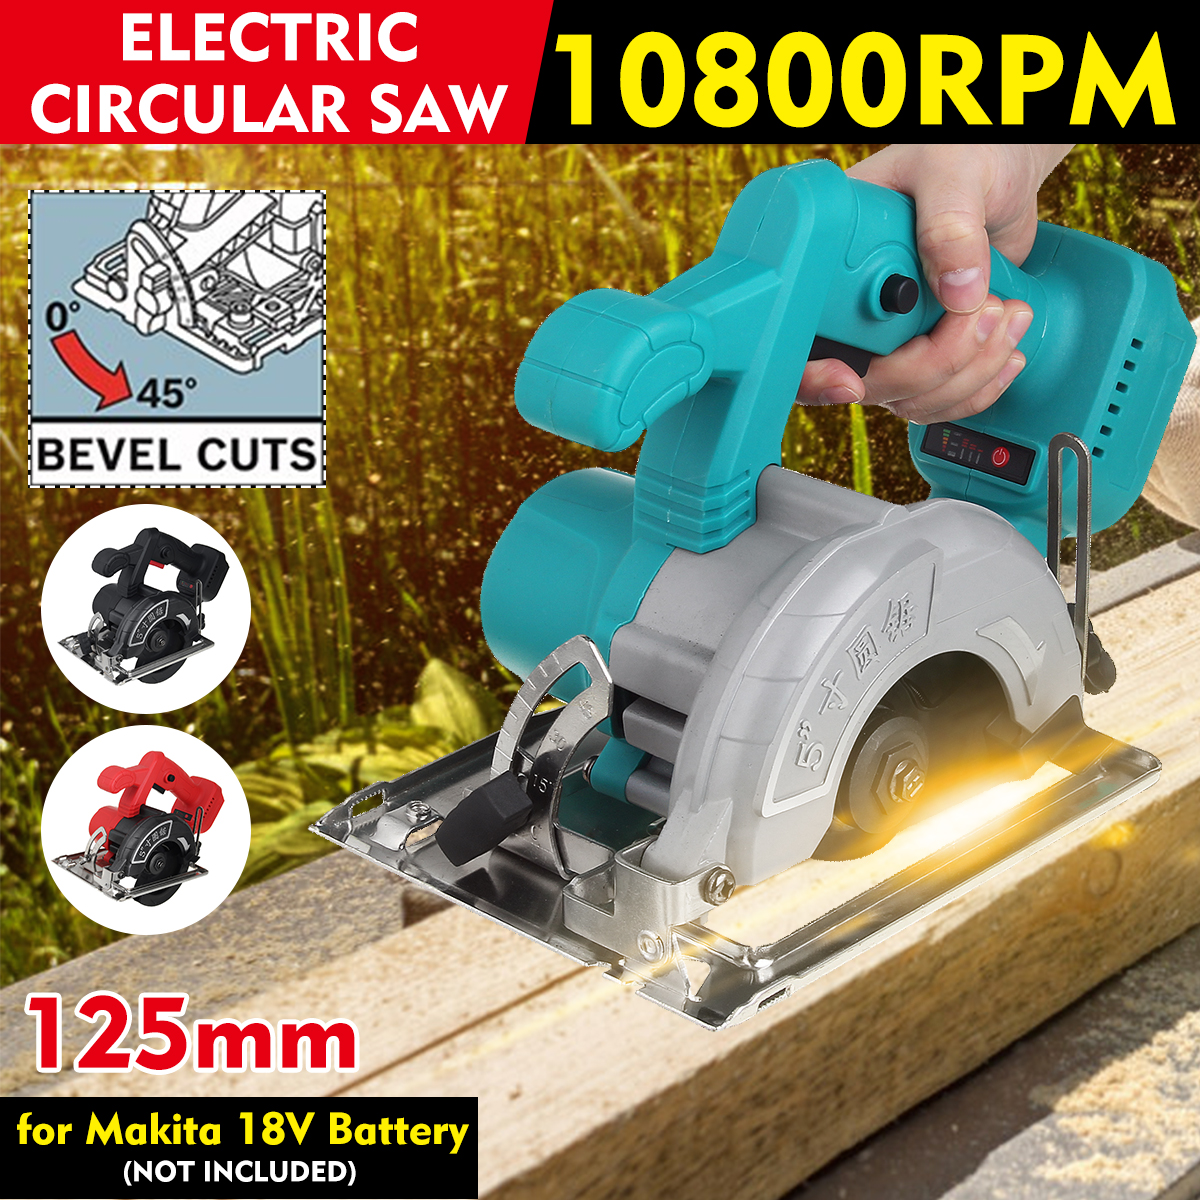 125mm-10800RPM-Multifunction-Circular-Saw-Scale-Bevel-Cutting-Power-Tools-For-18V-Makita-Battery-1759378-1